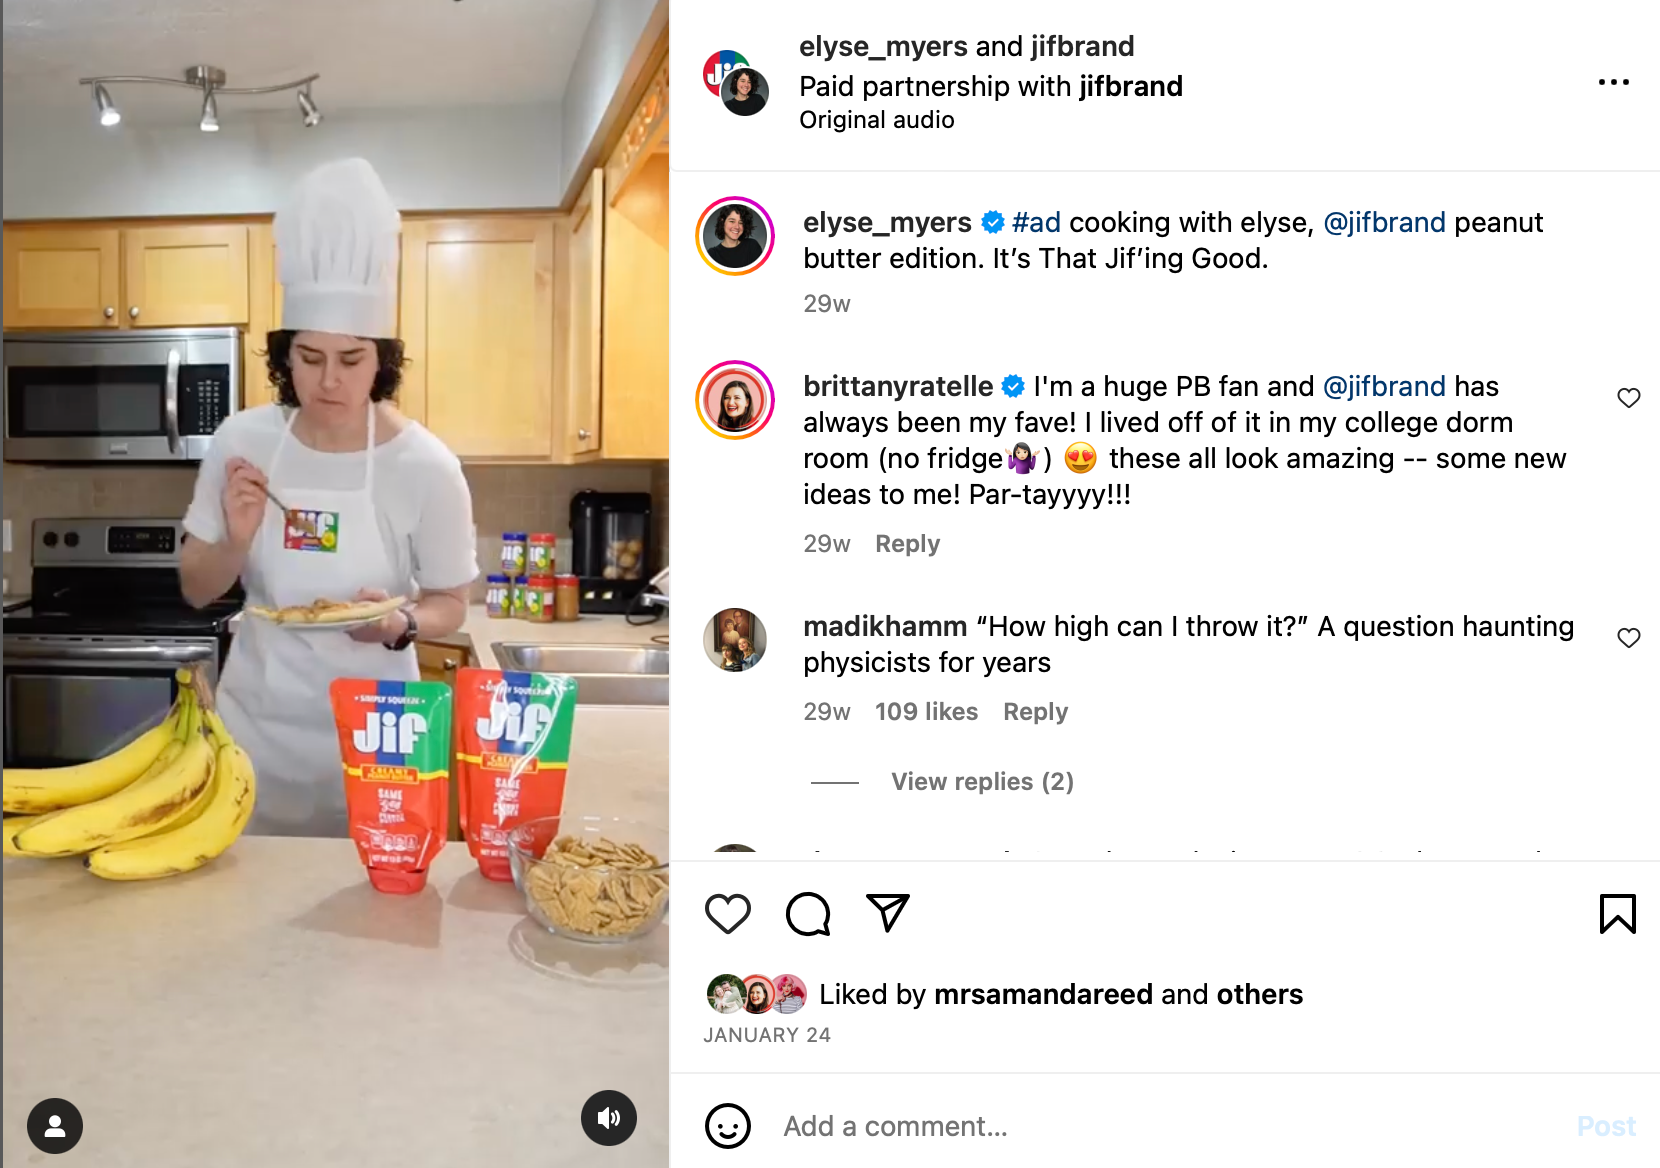 Brands like Jif work with influencers like Elyse Myers to draw visibility to their products and create more brand awareness.